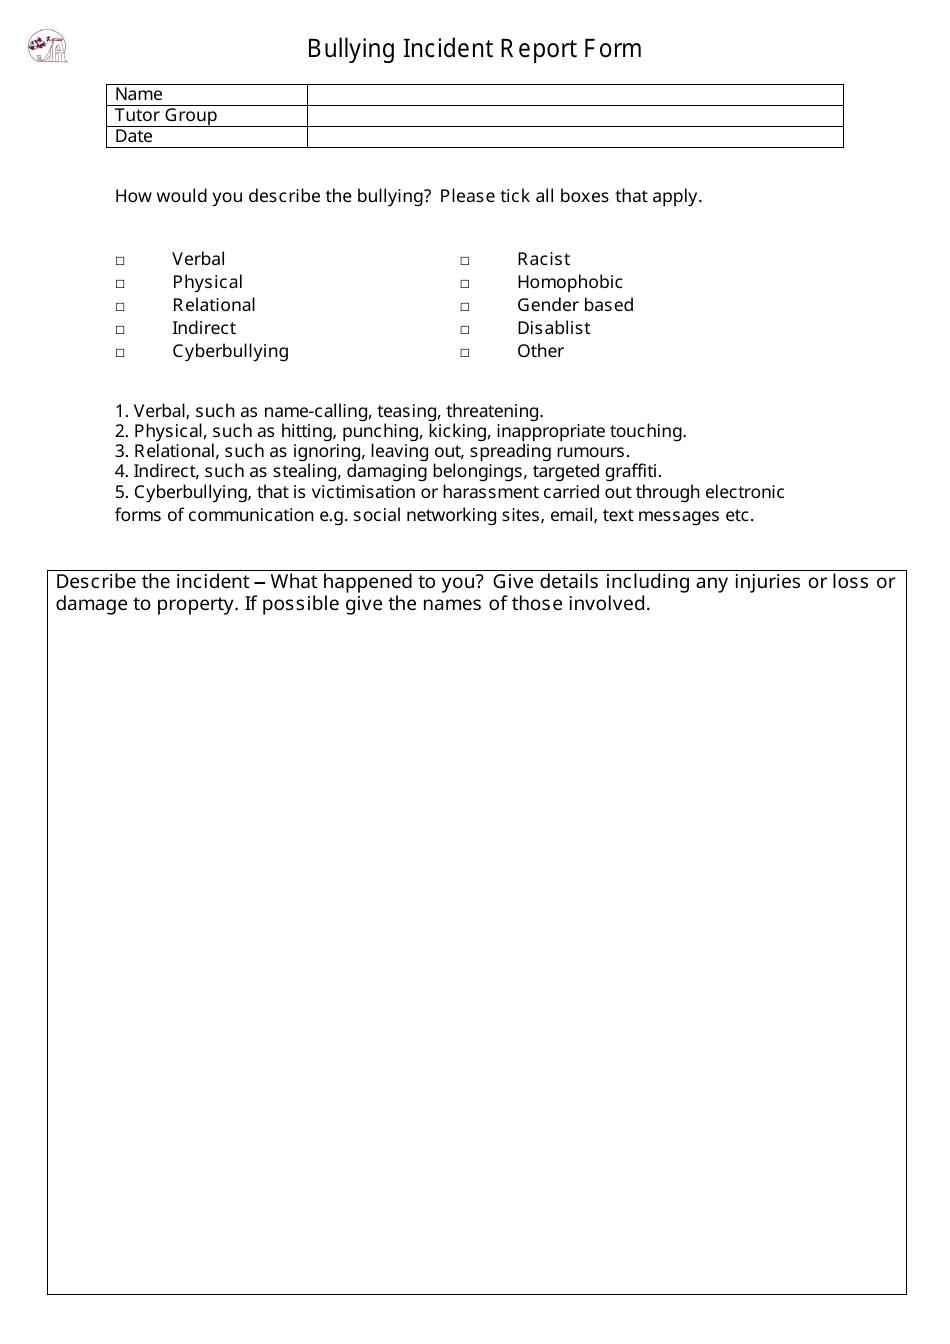 Bullying Incident Report Form, Page 1